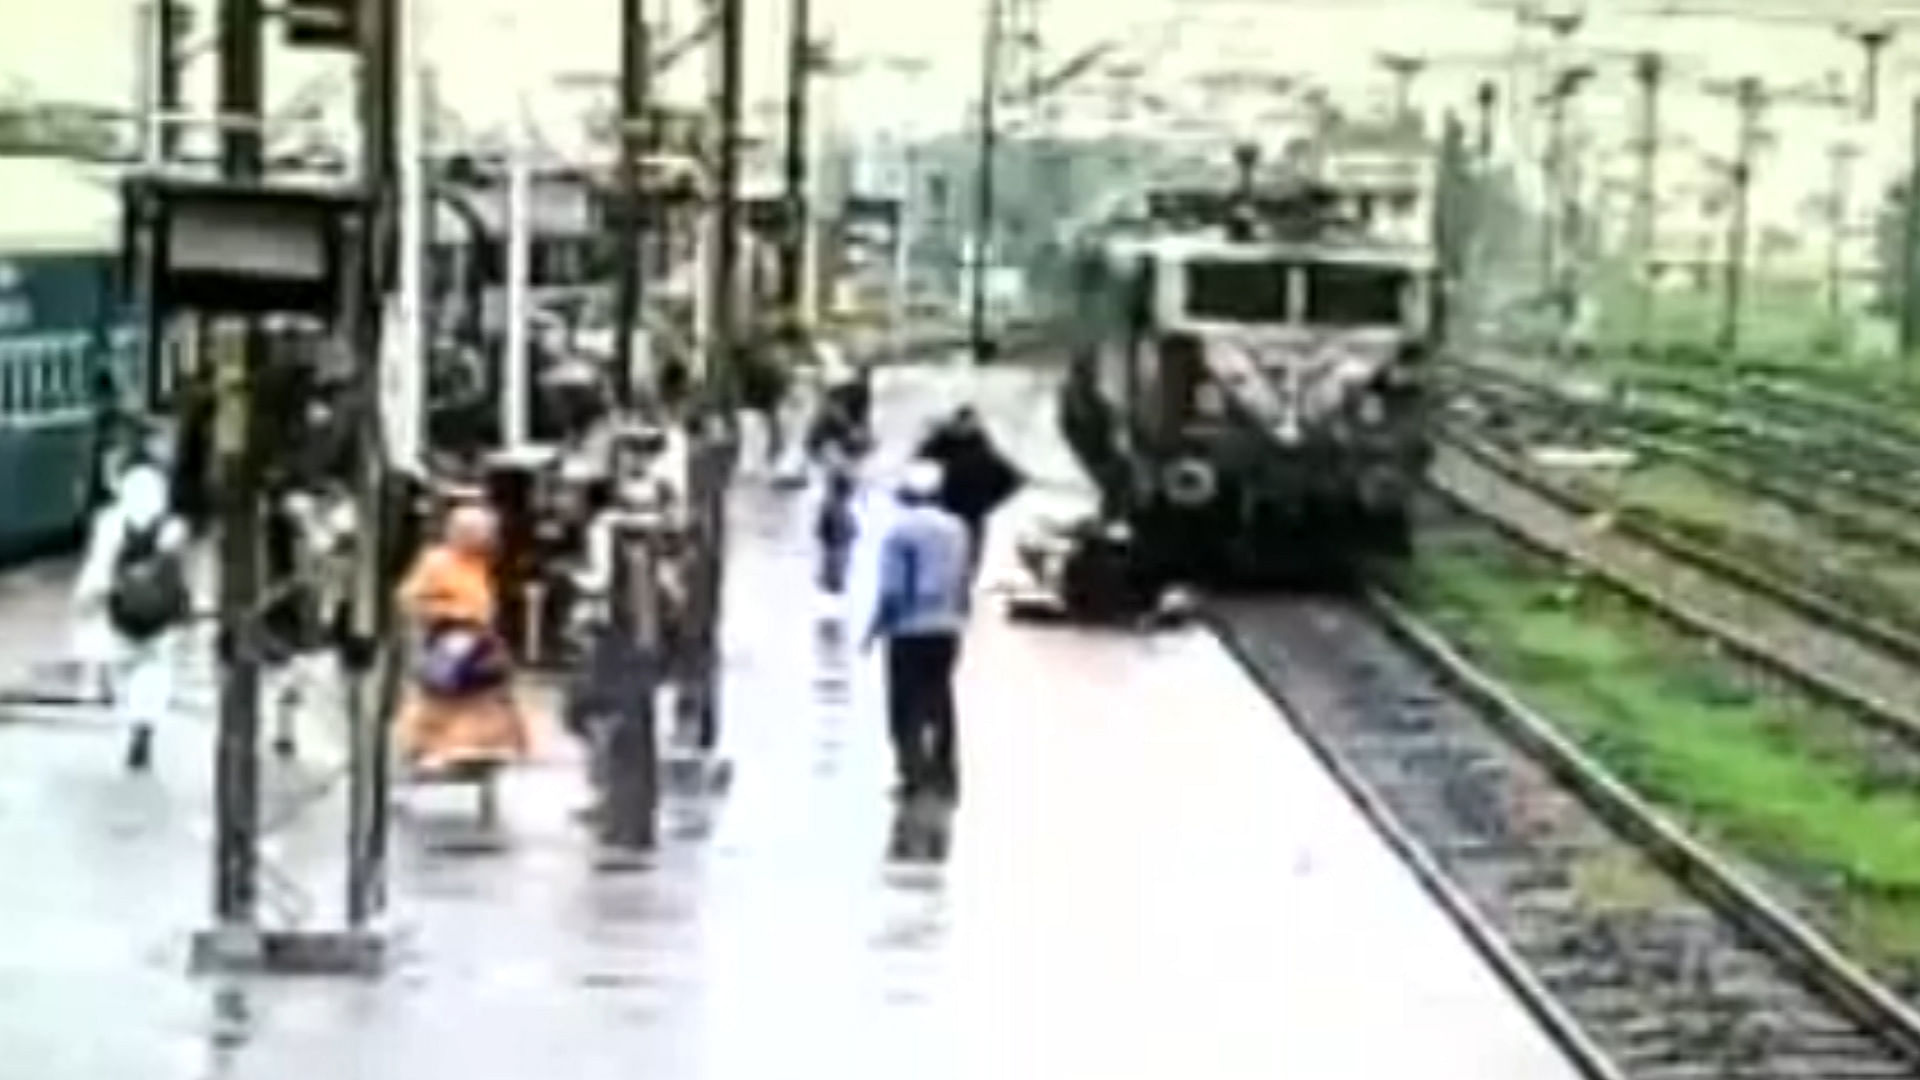 The woman escaped narrowly being hit by the oncoming train at Dahod railway station in Gujarat. (Photo: ANI screengrab)